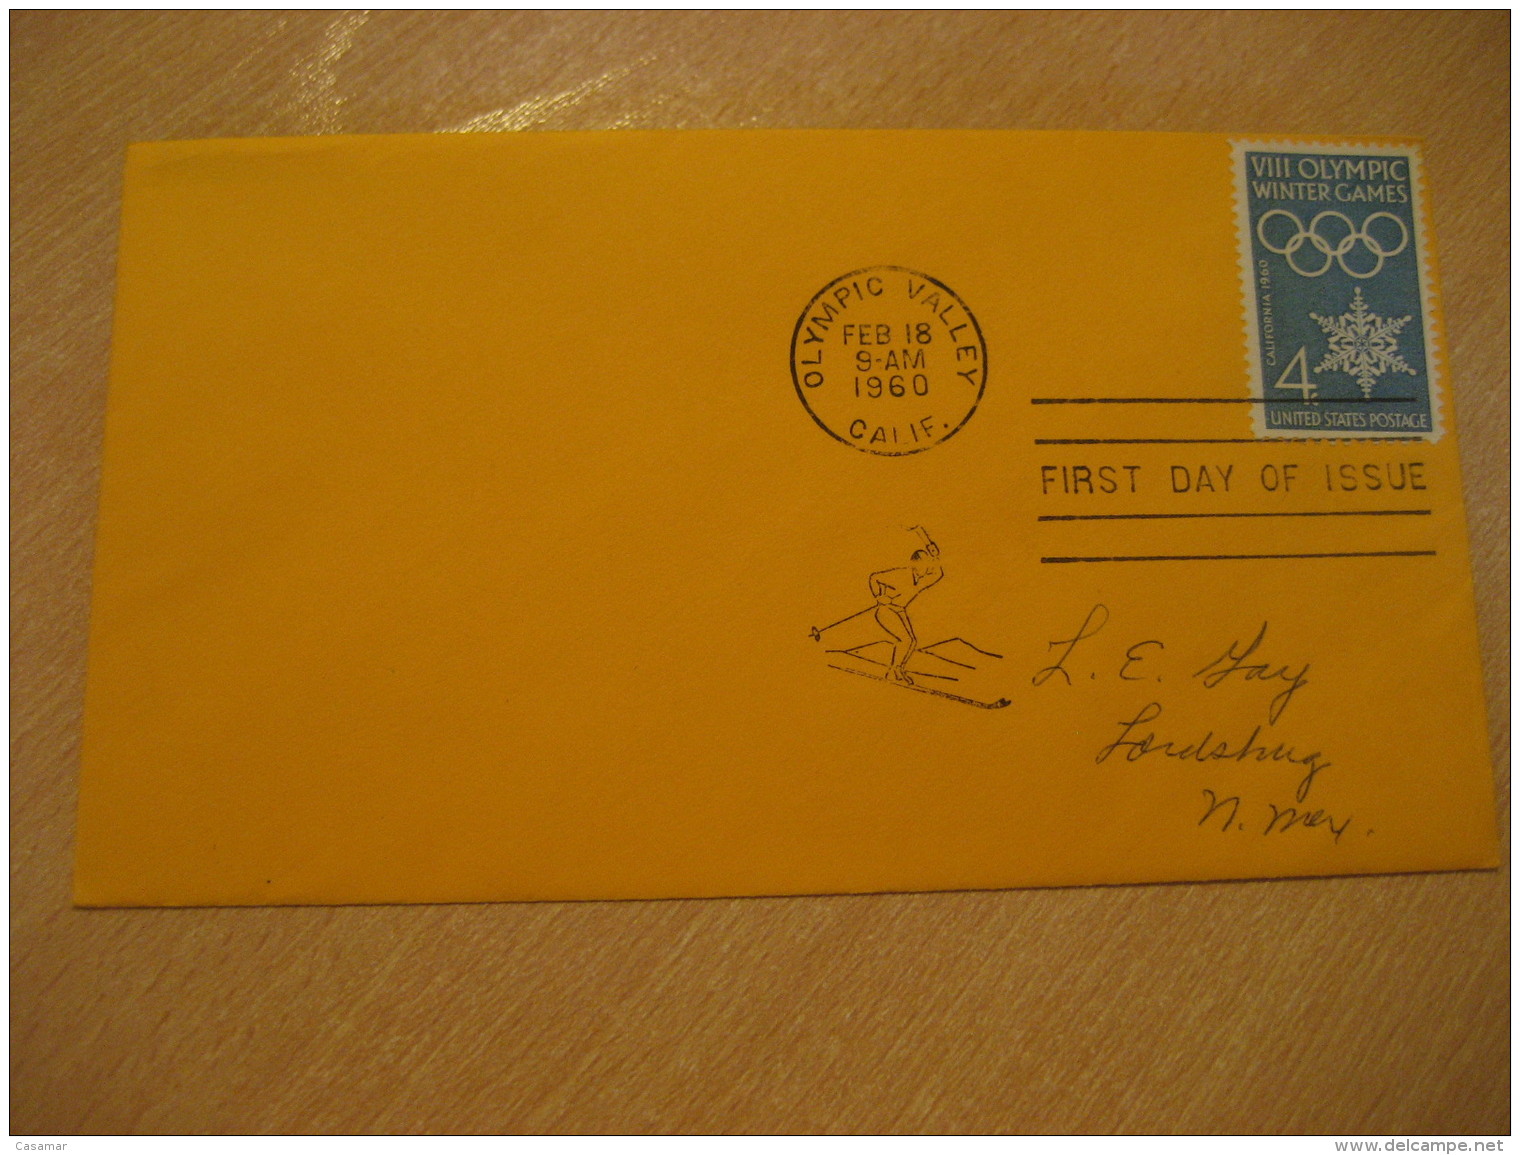 SQUAW VALLEY 1960 Winter Olympic Games Olympics OLYMPIC VALLEY 1960 FDC Cancel Cover USA - Winter 1960: Squaw Valley